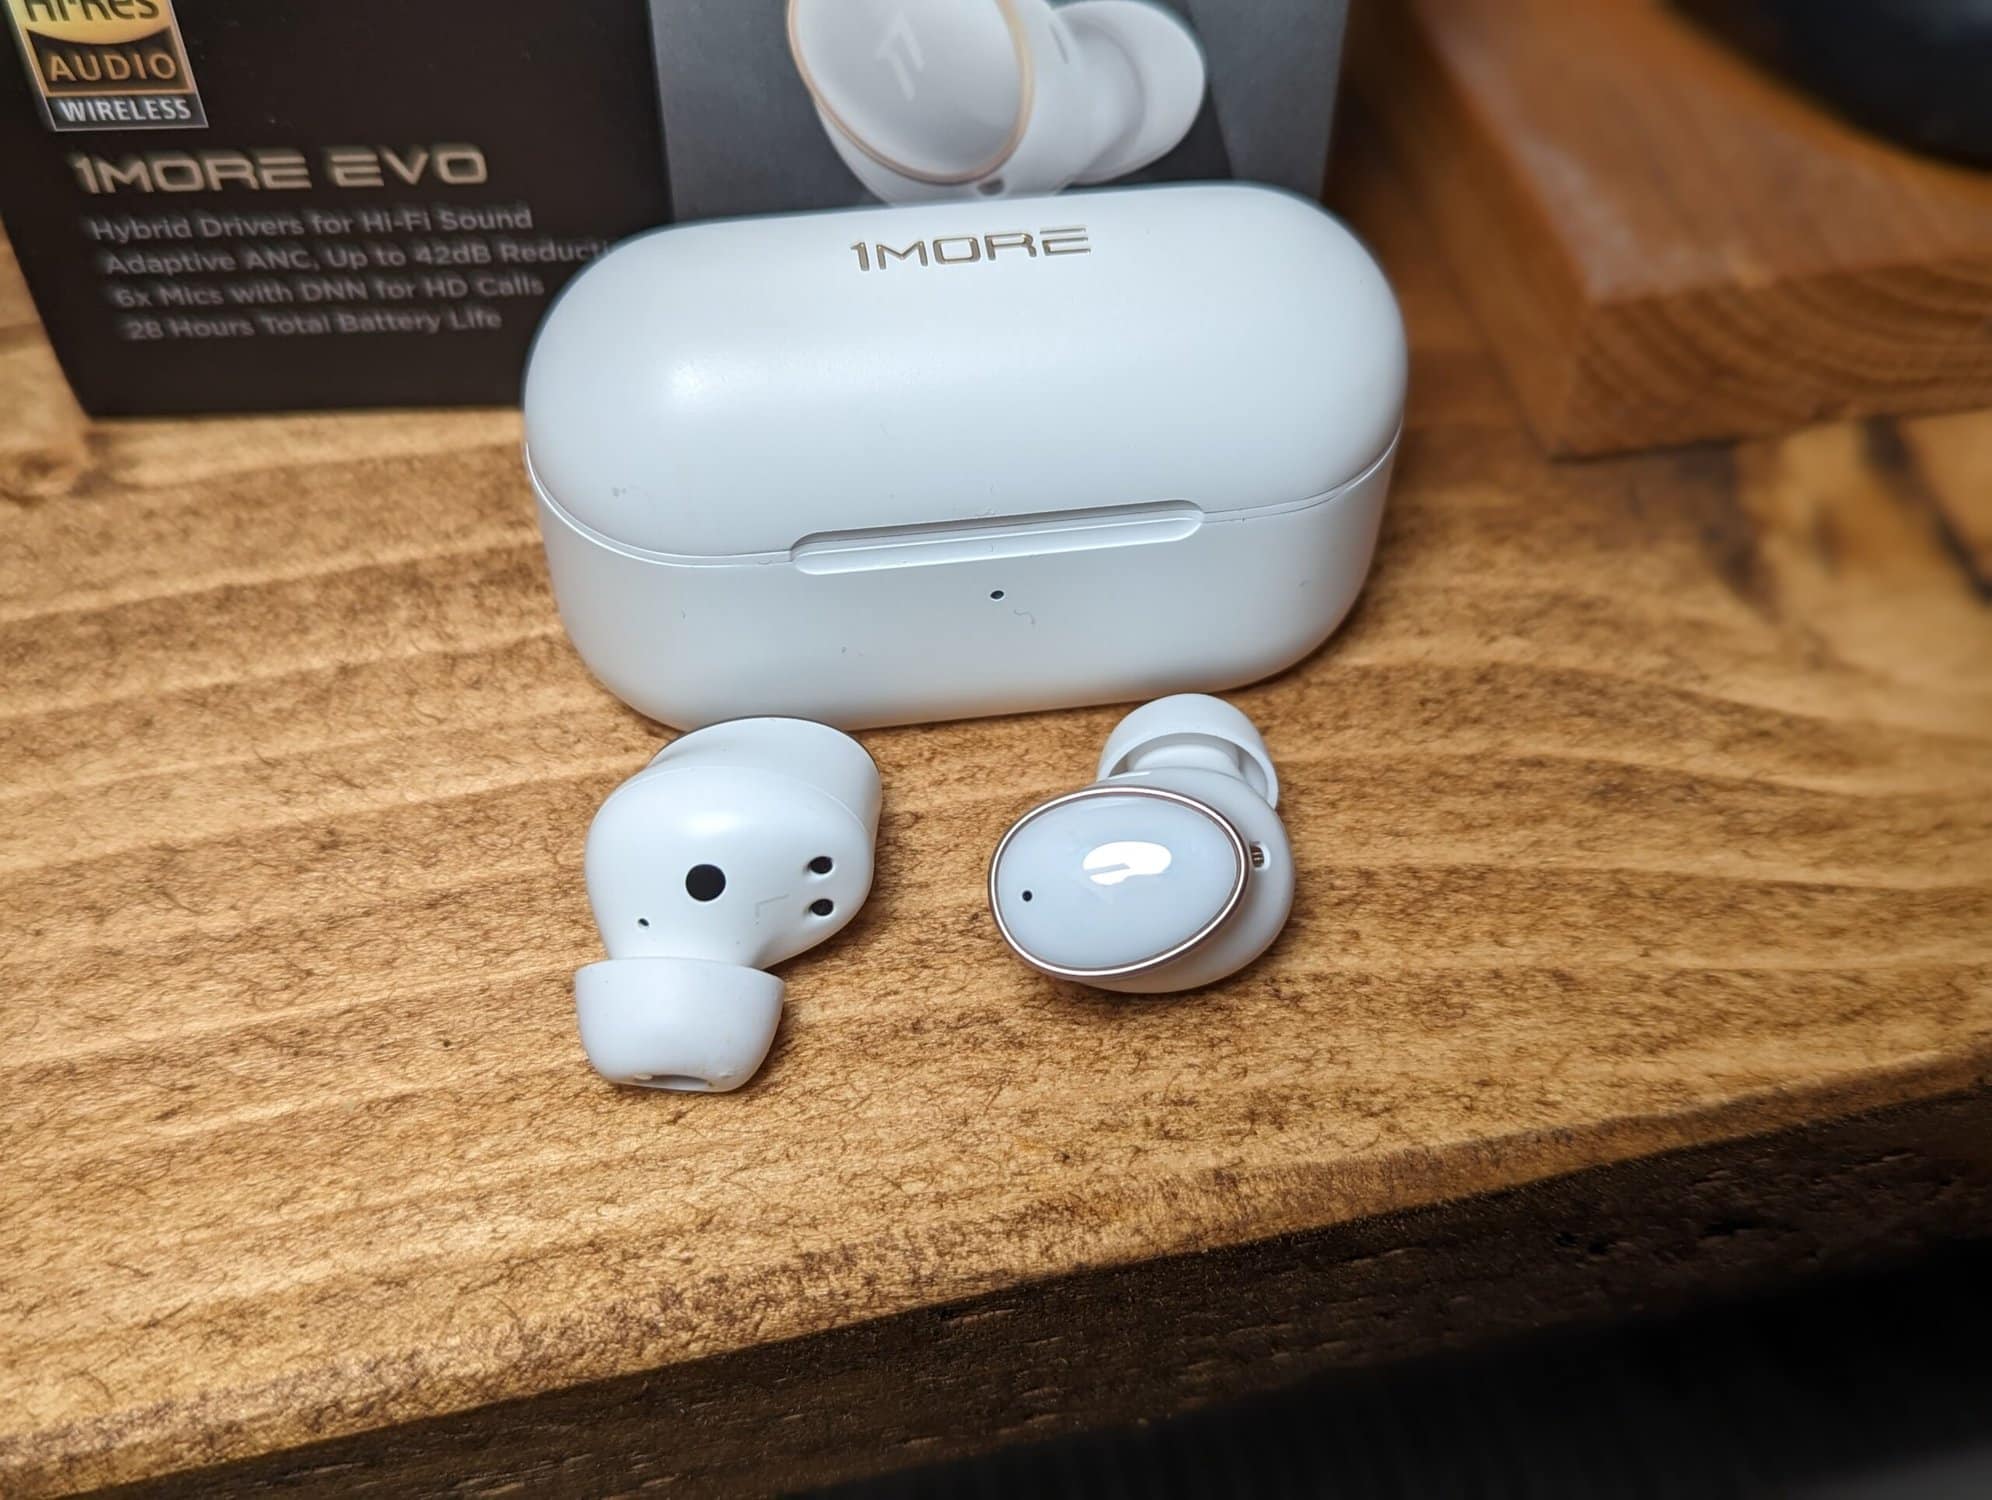 1More Evo Review earbuds design and shape 2 scaled